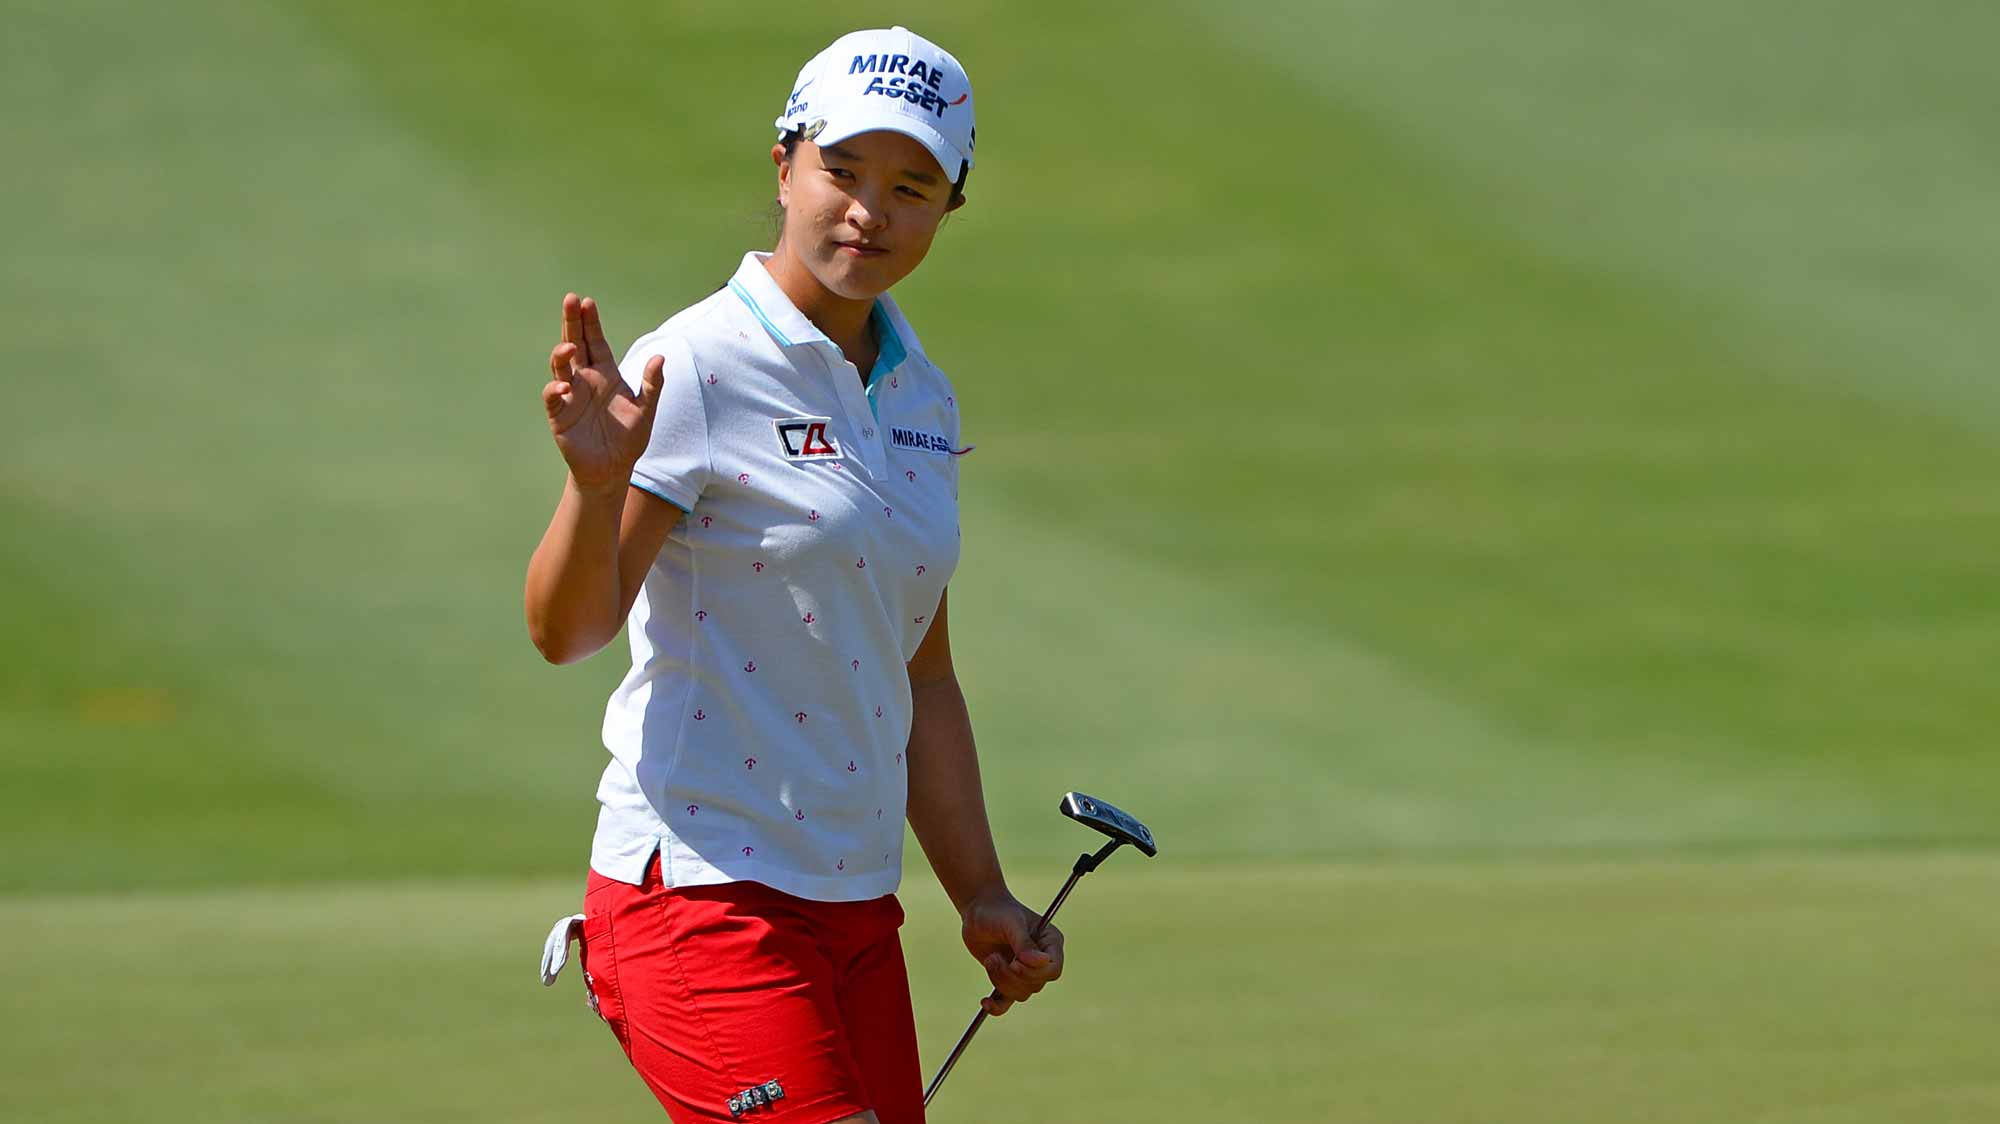 Sei Young Kim of South Korea celebrates a birdie putt on the second hole during the final round of the ANA Inspiration on the Dinah Shore Tournament Course at Mission Hills Country Club